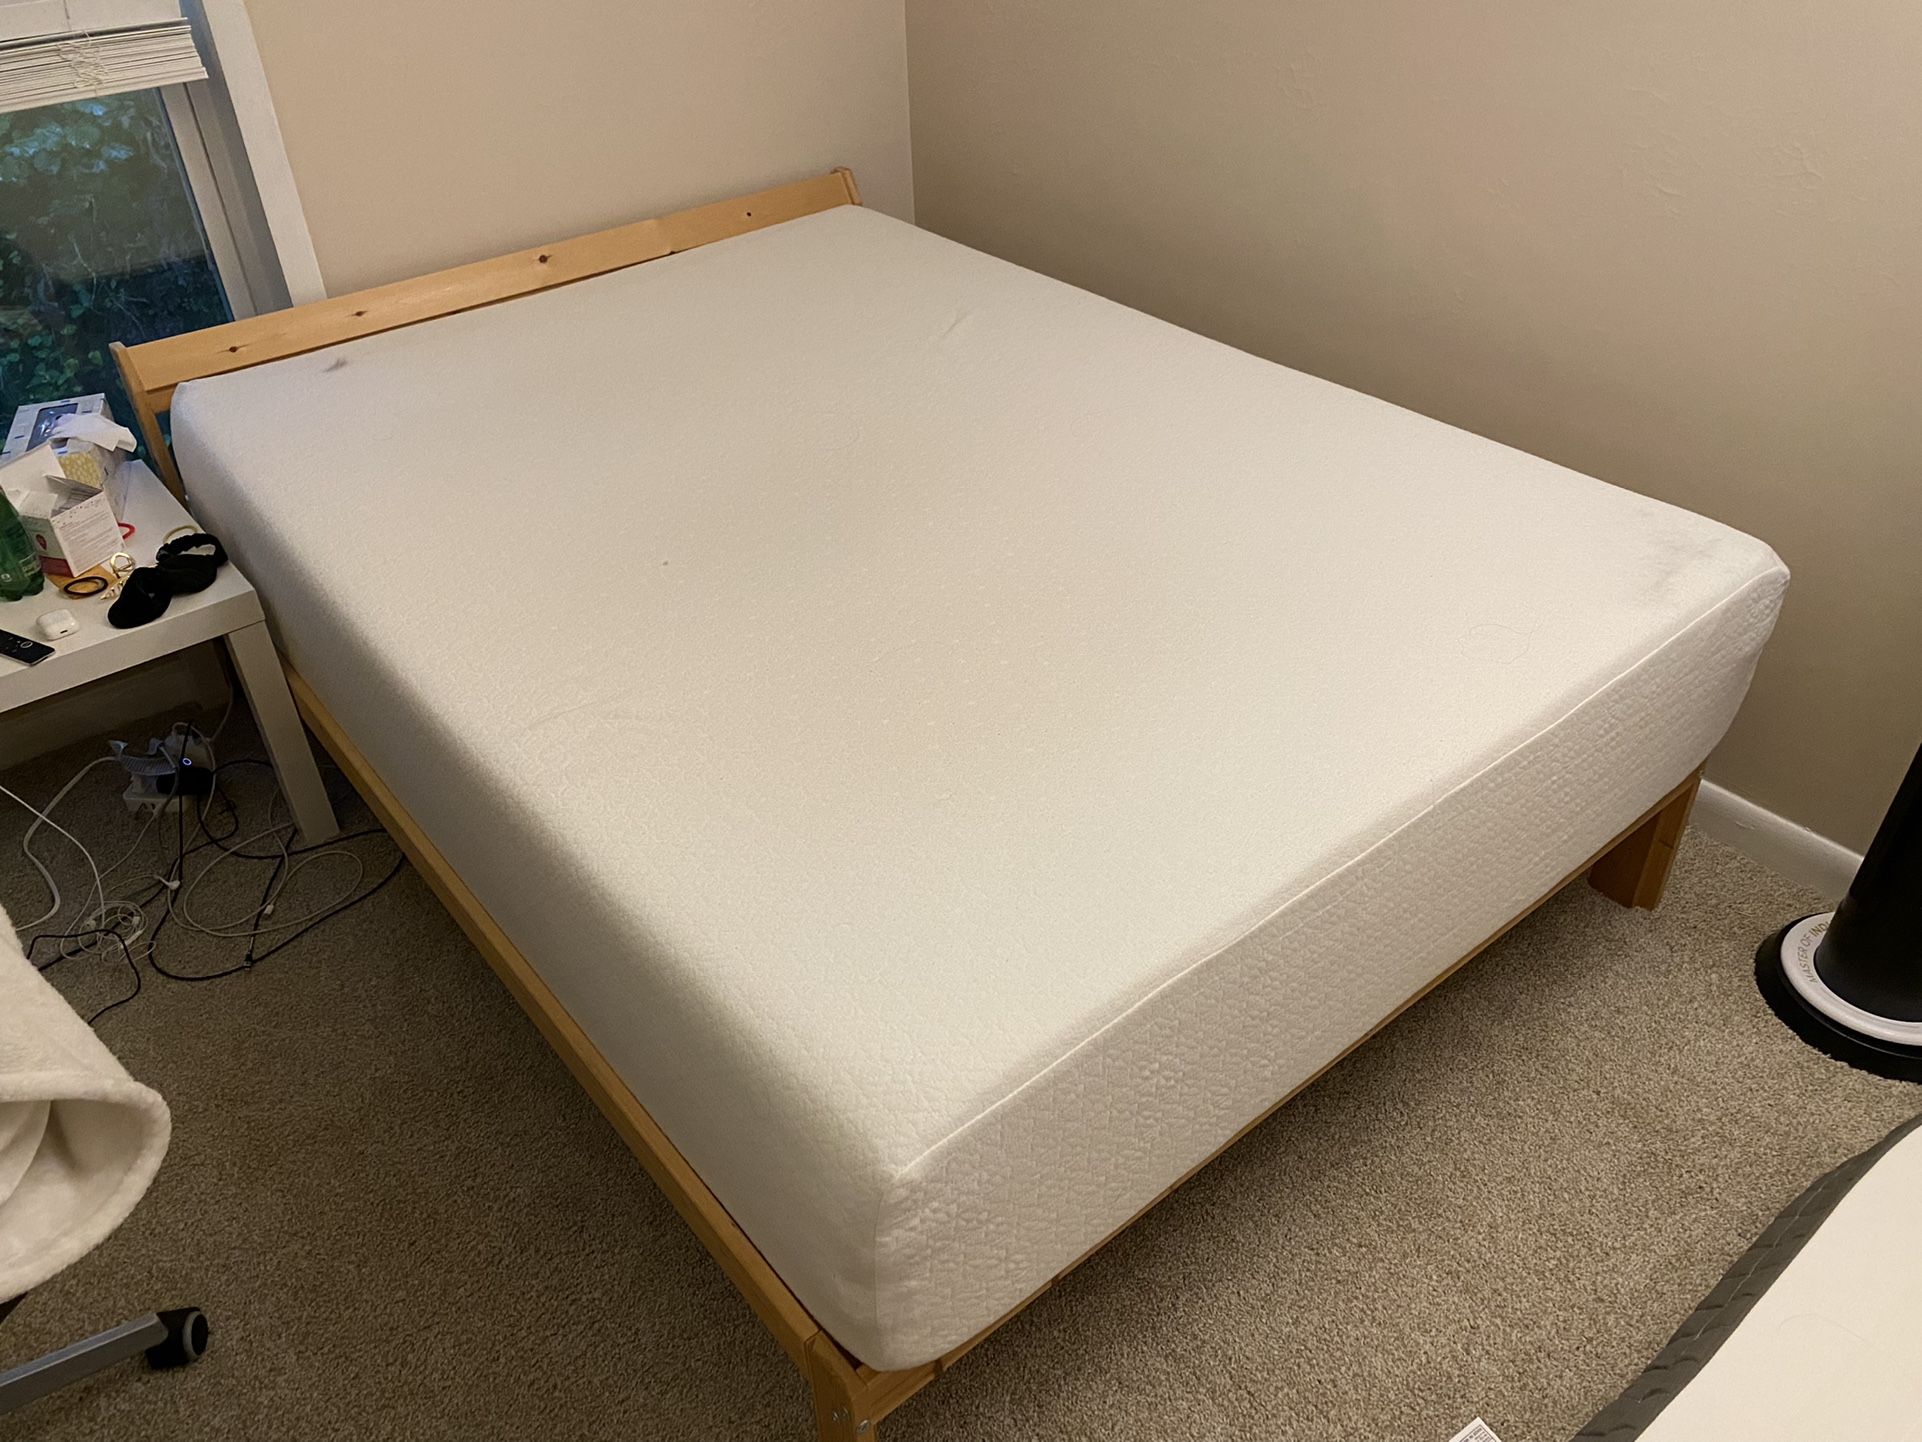 Full-size Memory foam bed mattress without frame